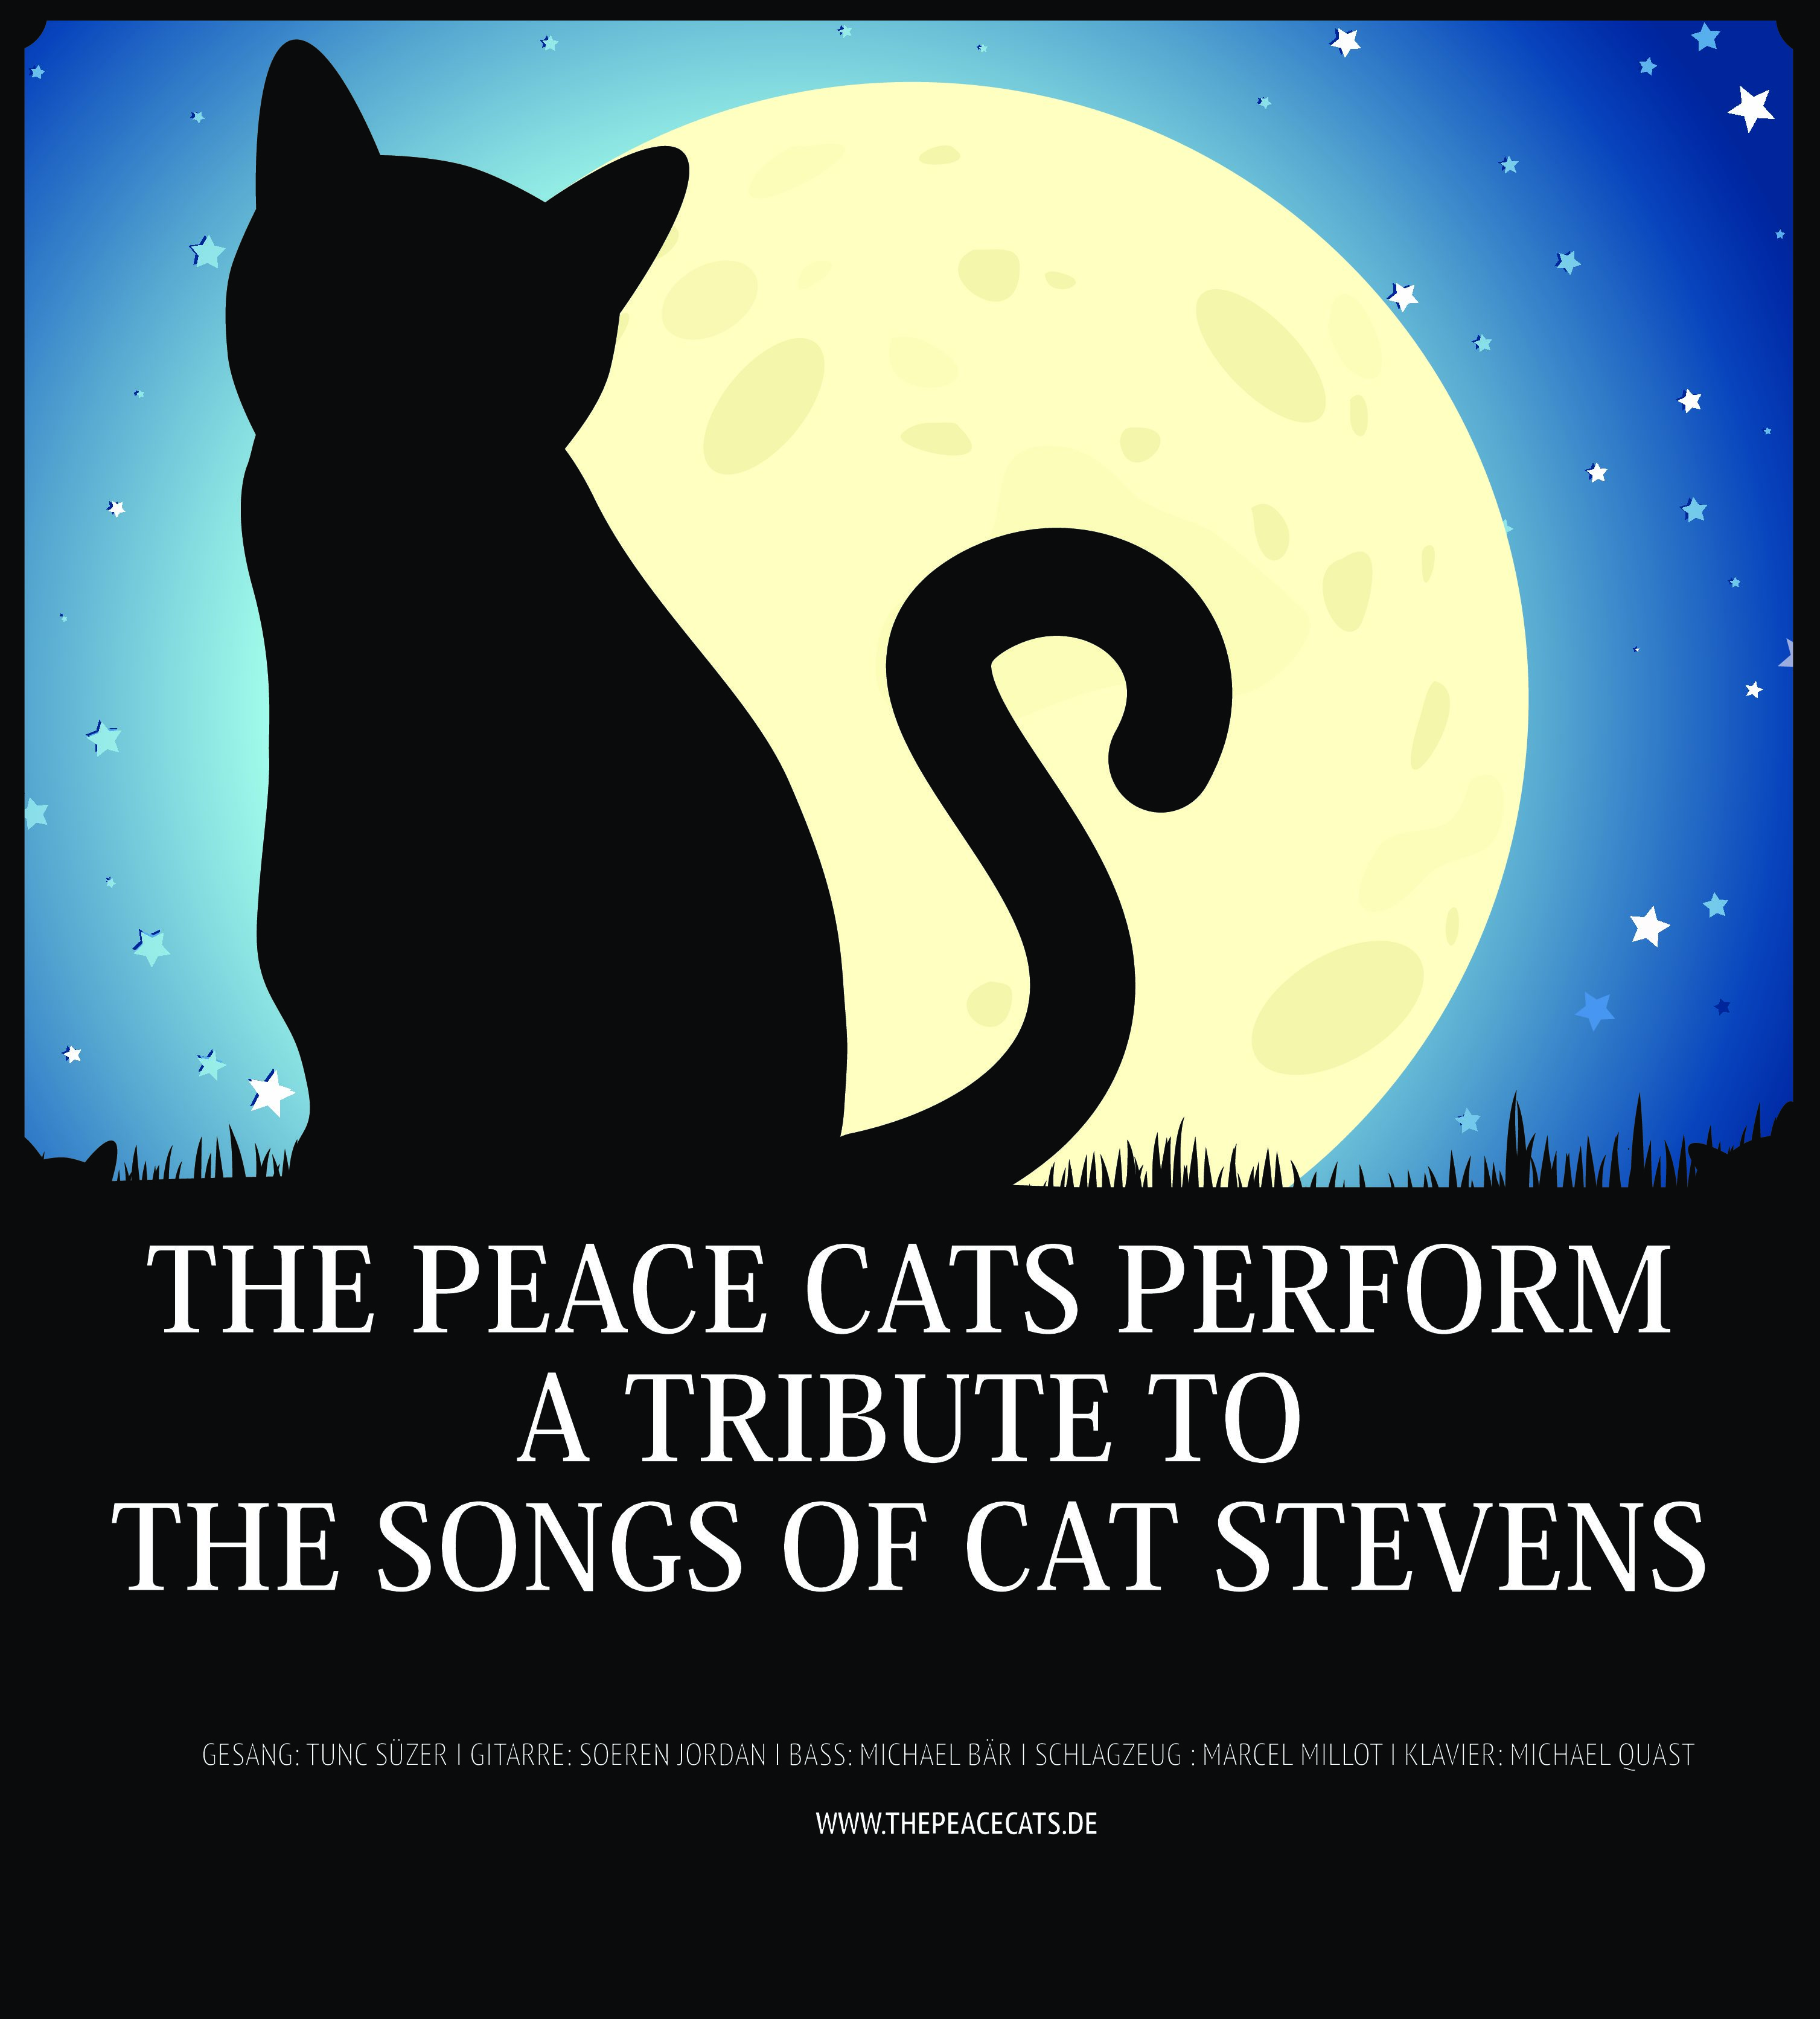 The songs of Cat Stevens – a tribute performed by the Peace Cats